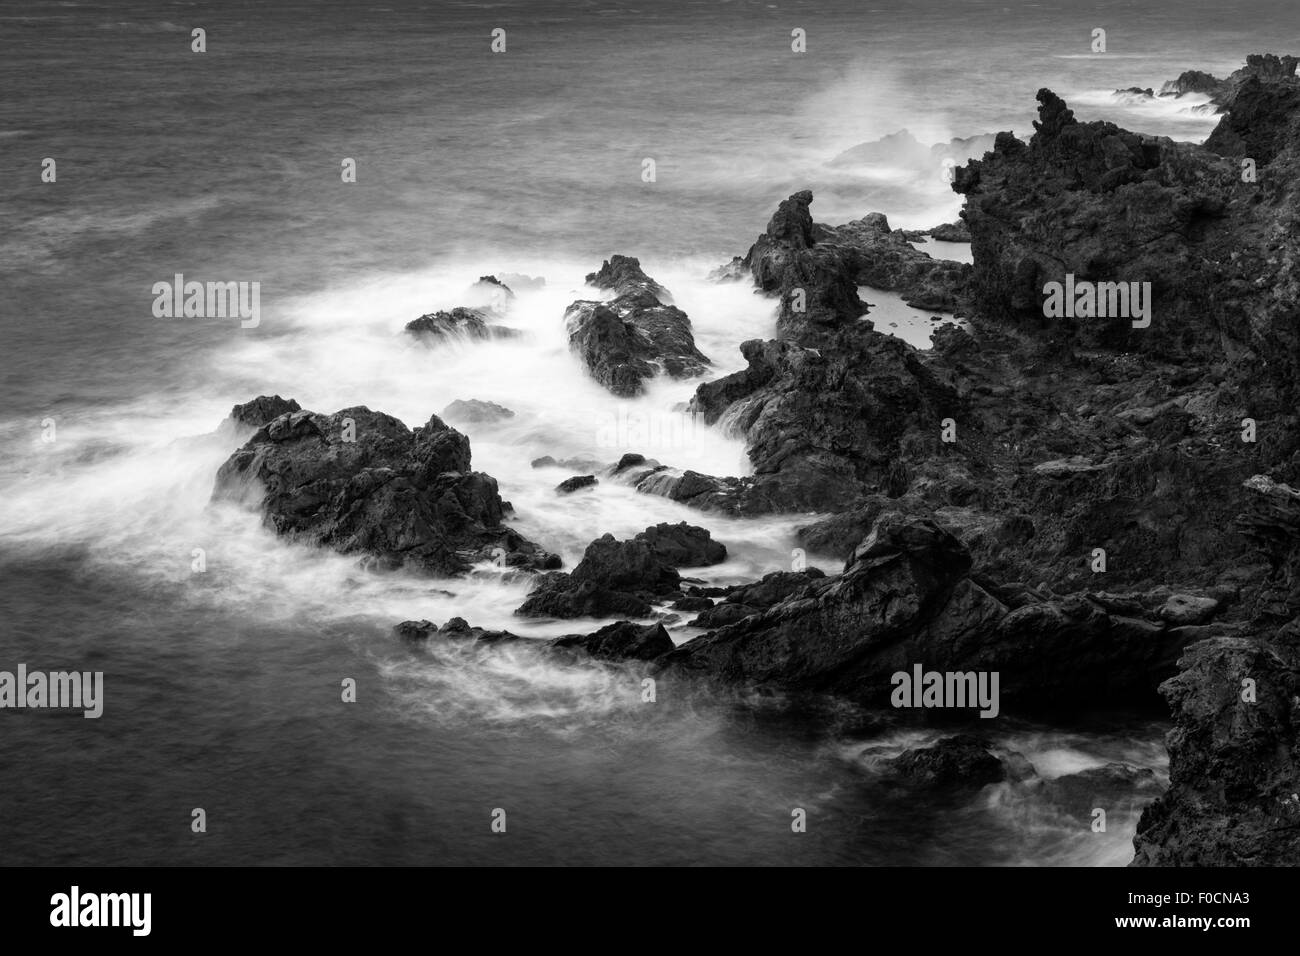 Long exposure view of the atlantic ocean on the rugged rocky coastline of Tenerife, Canary Islands, Spain. Color F0CNA6 Stock Photo